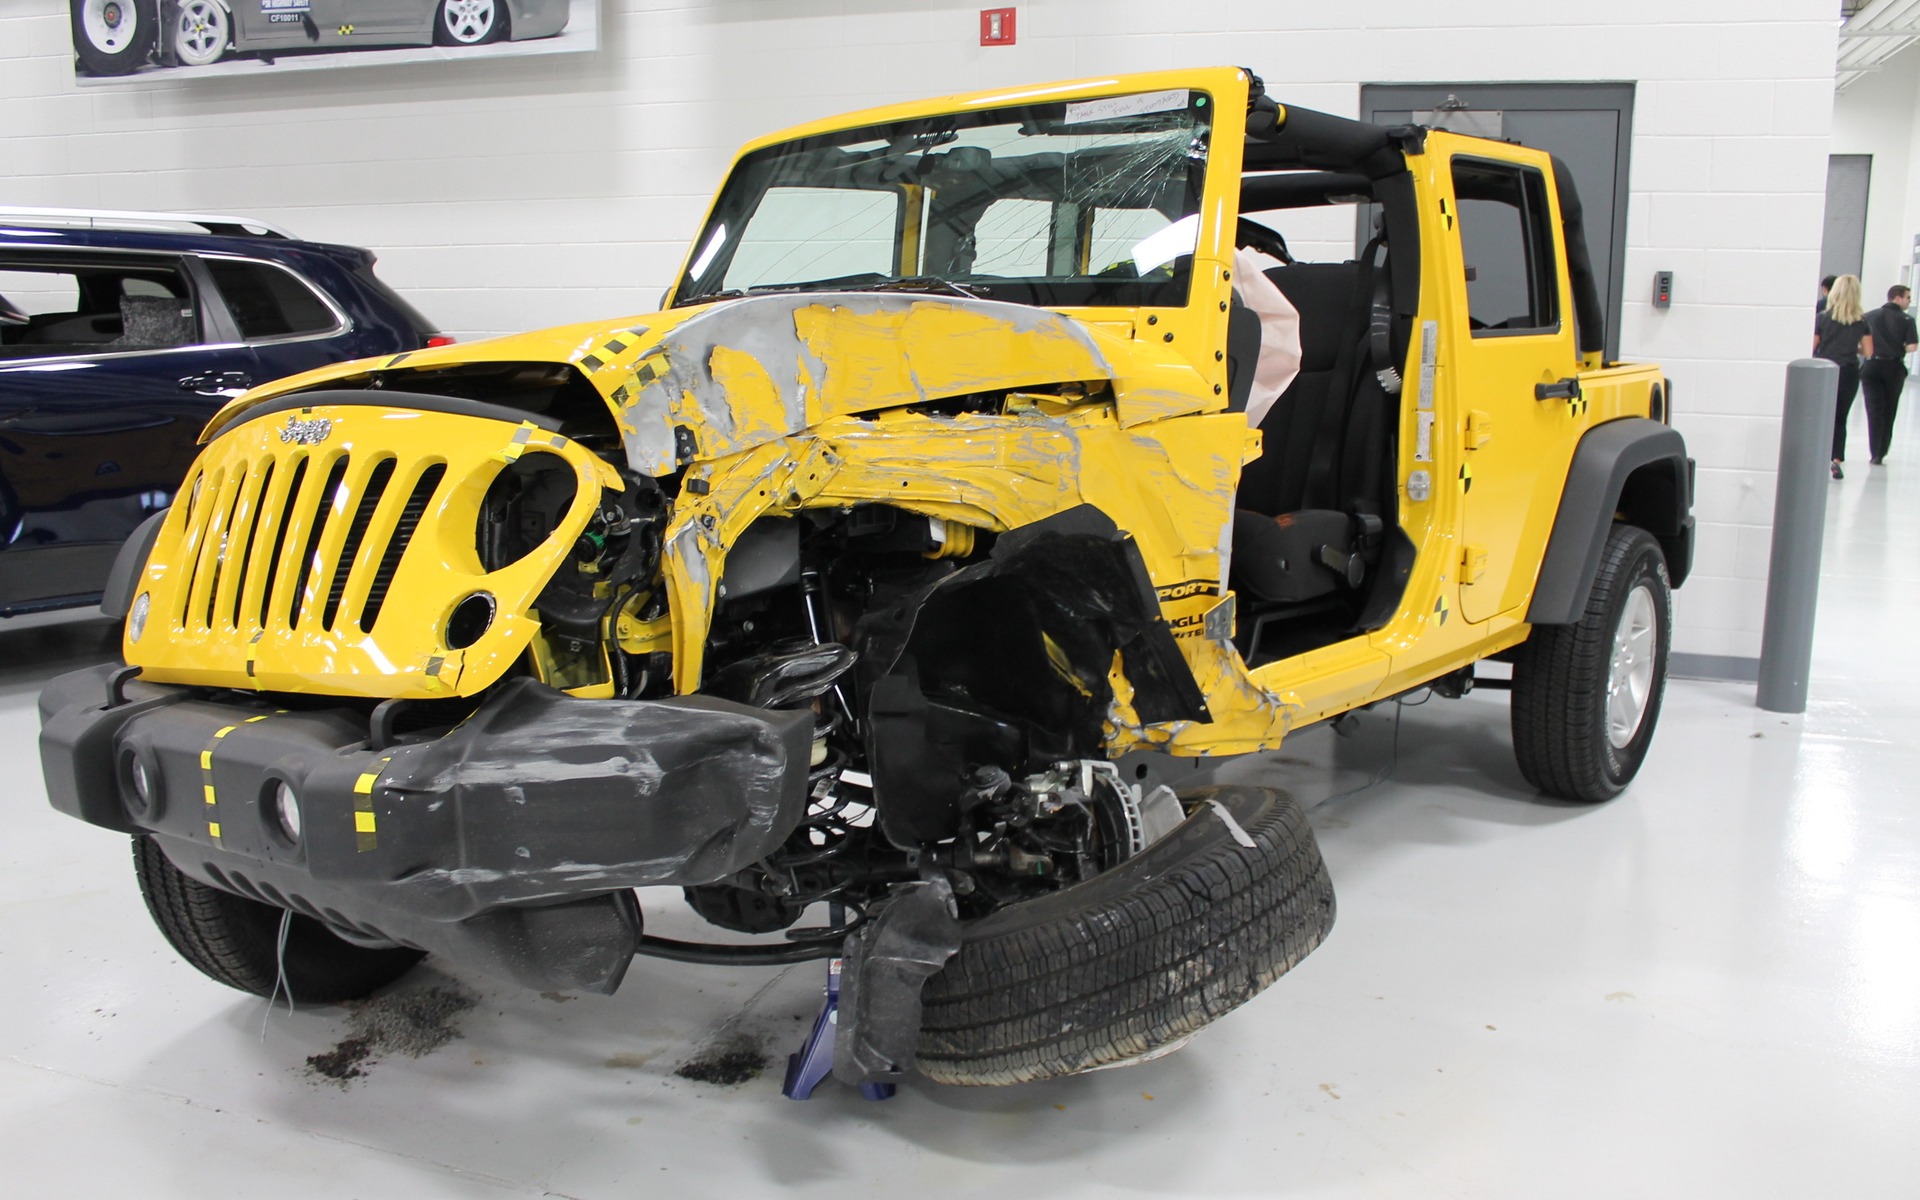 Remains of a Jeep Wrangler.